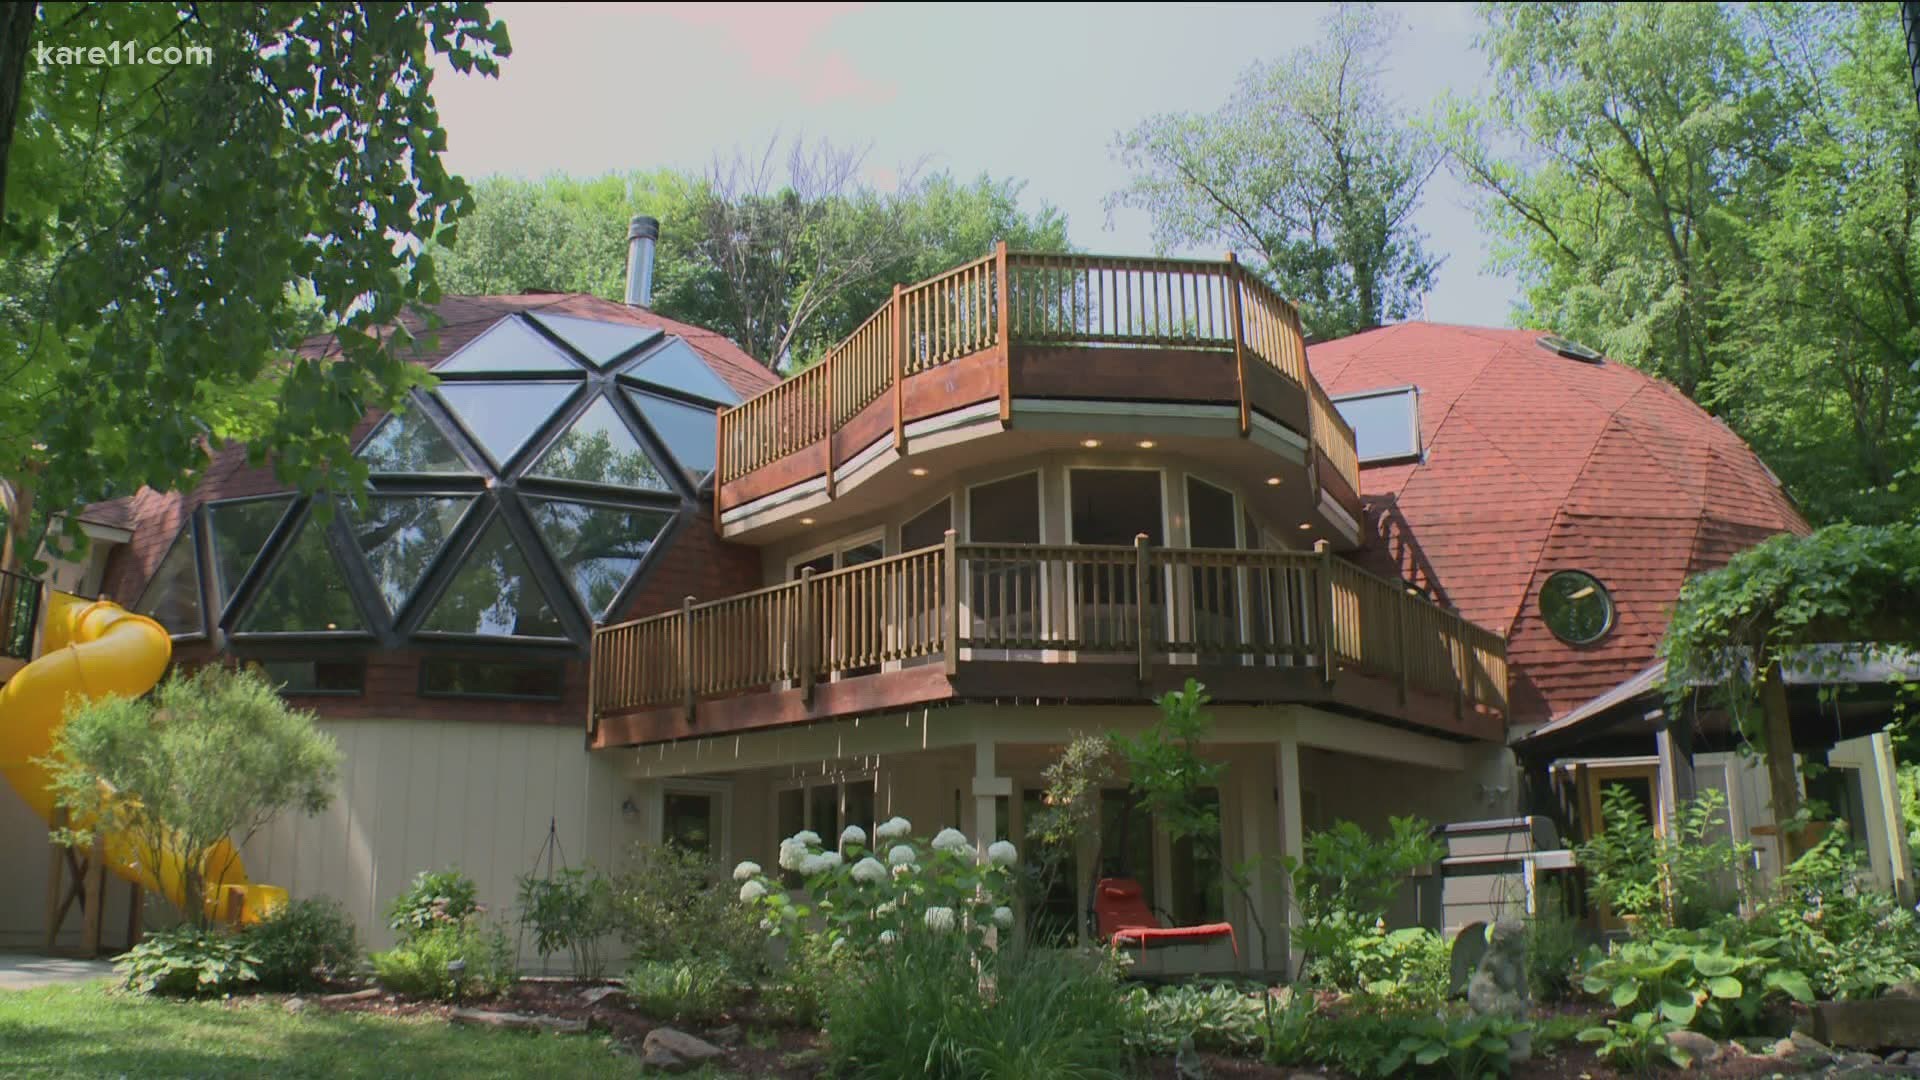 A unique home in Eden Prairie is about to hit the market. It's a house connected by two geodesic domes